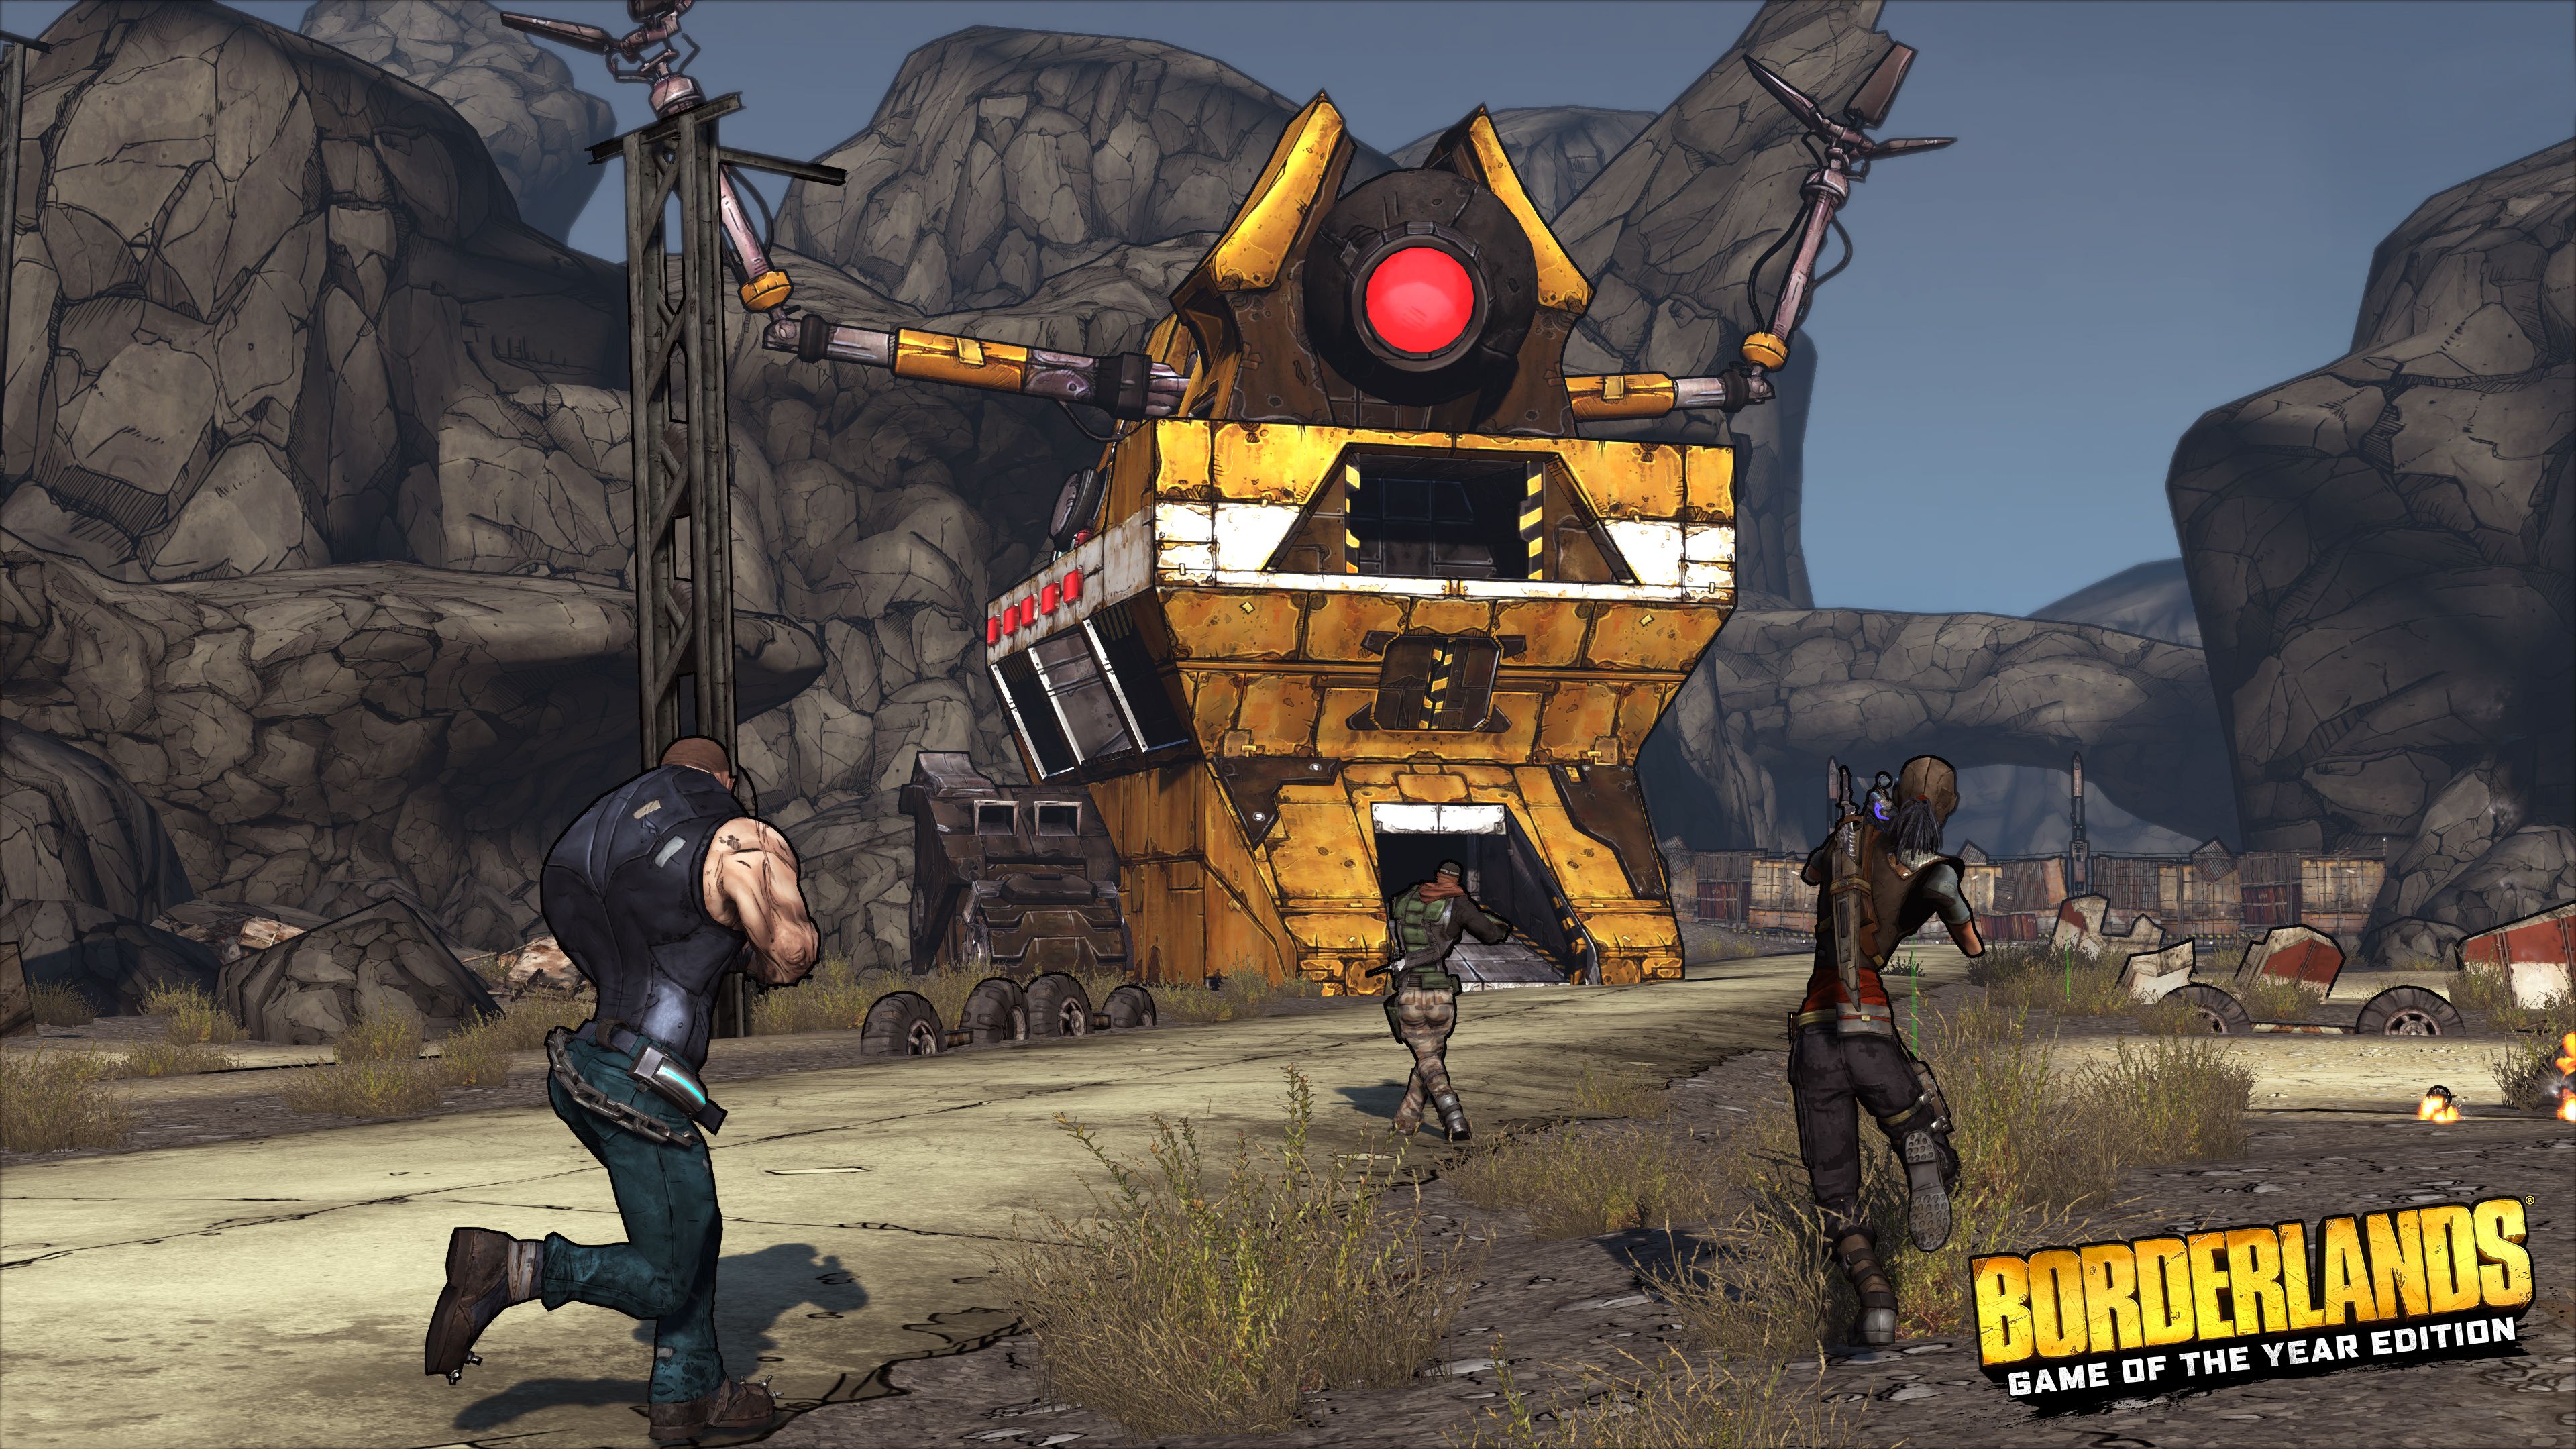 Borderlands-Game-of-the-Year-Edition_2019_03-28-19_005